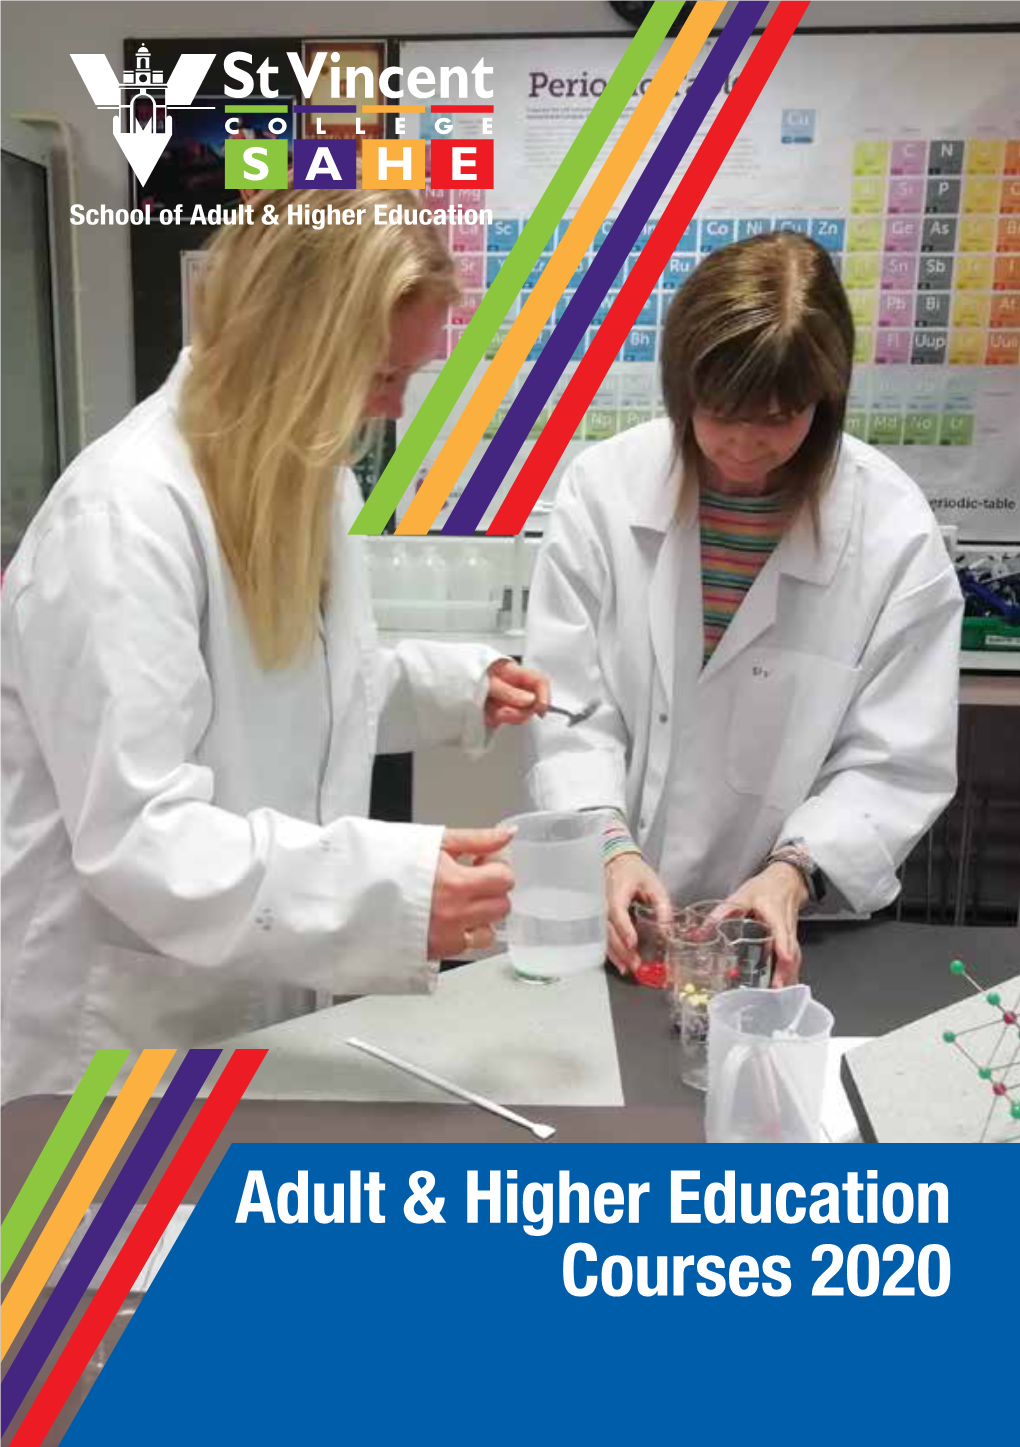 Adult & Higher Education Courses 2020